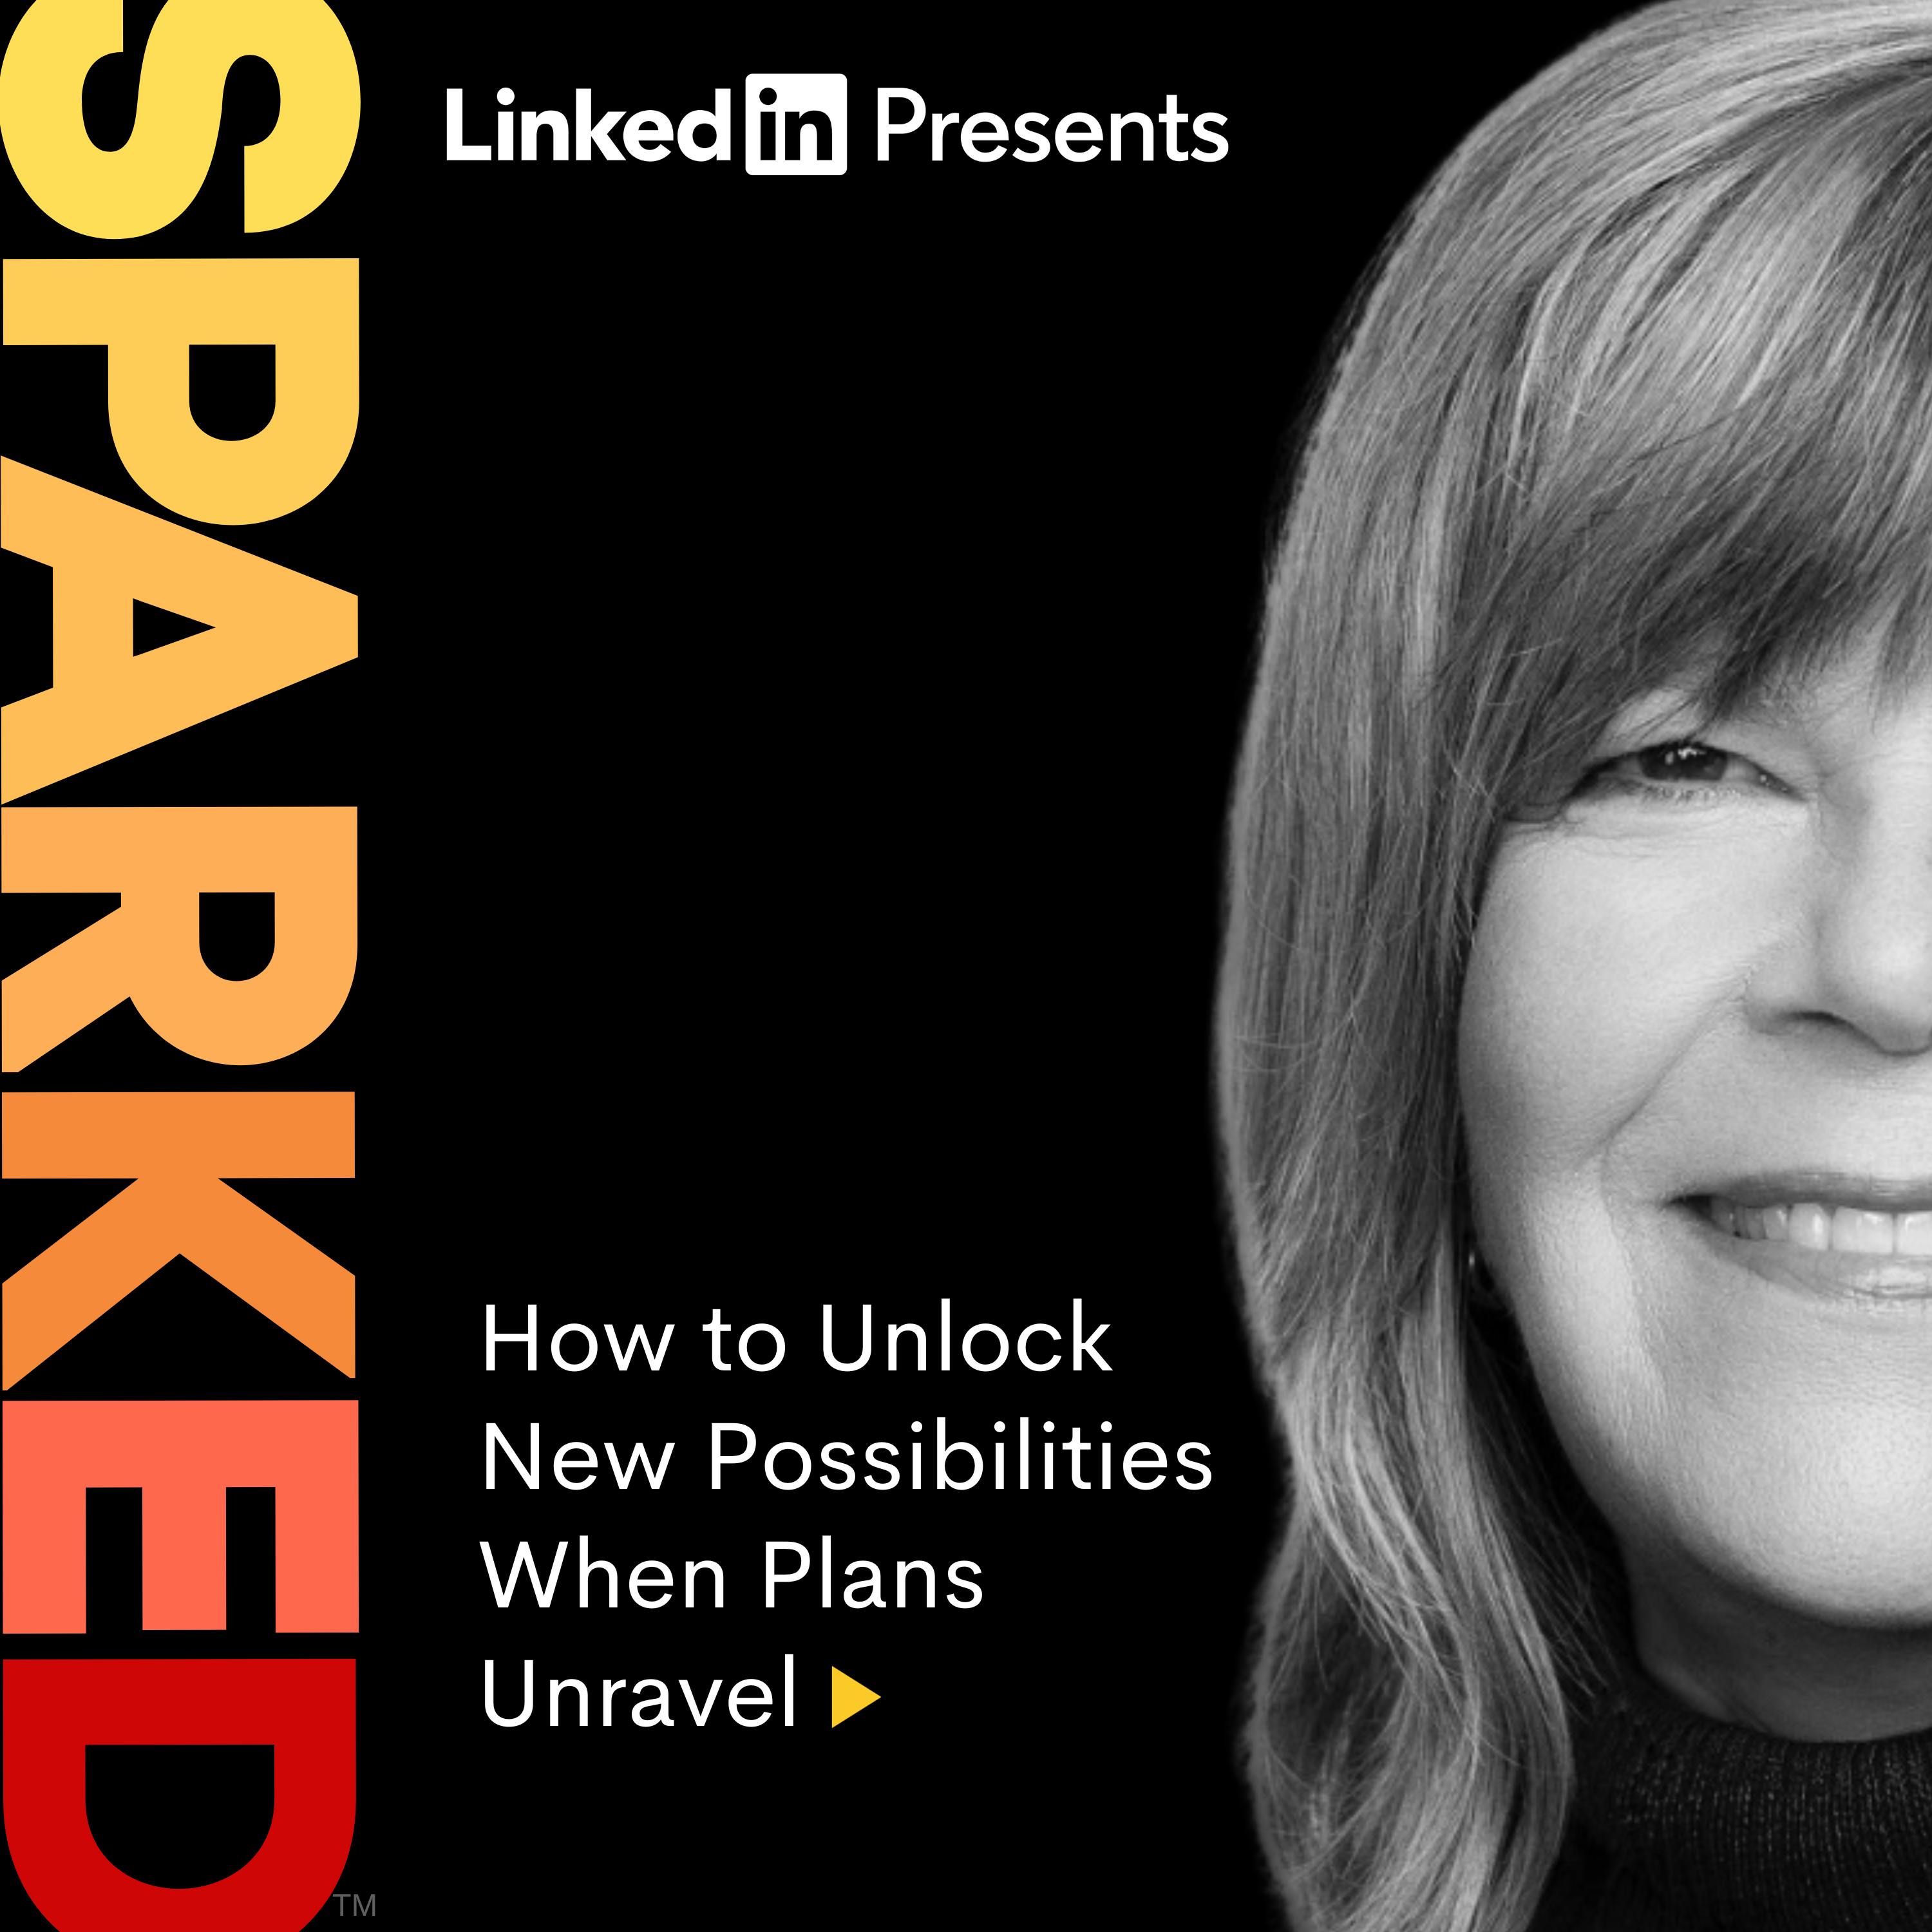 How to Unlock New Possibilities When Plans Unravel